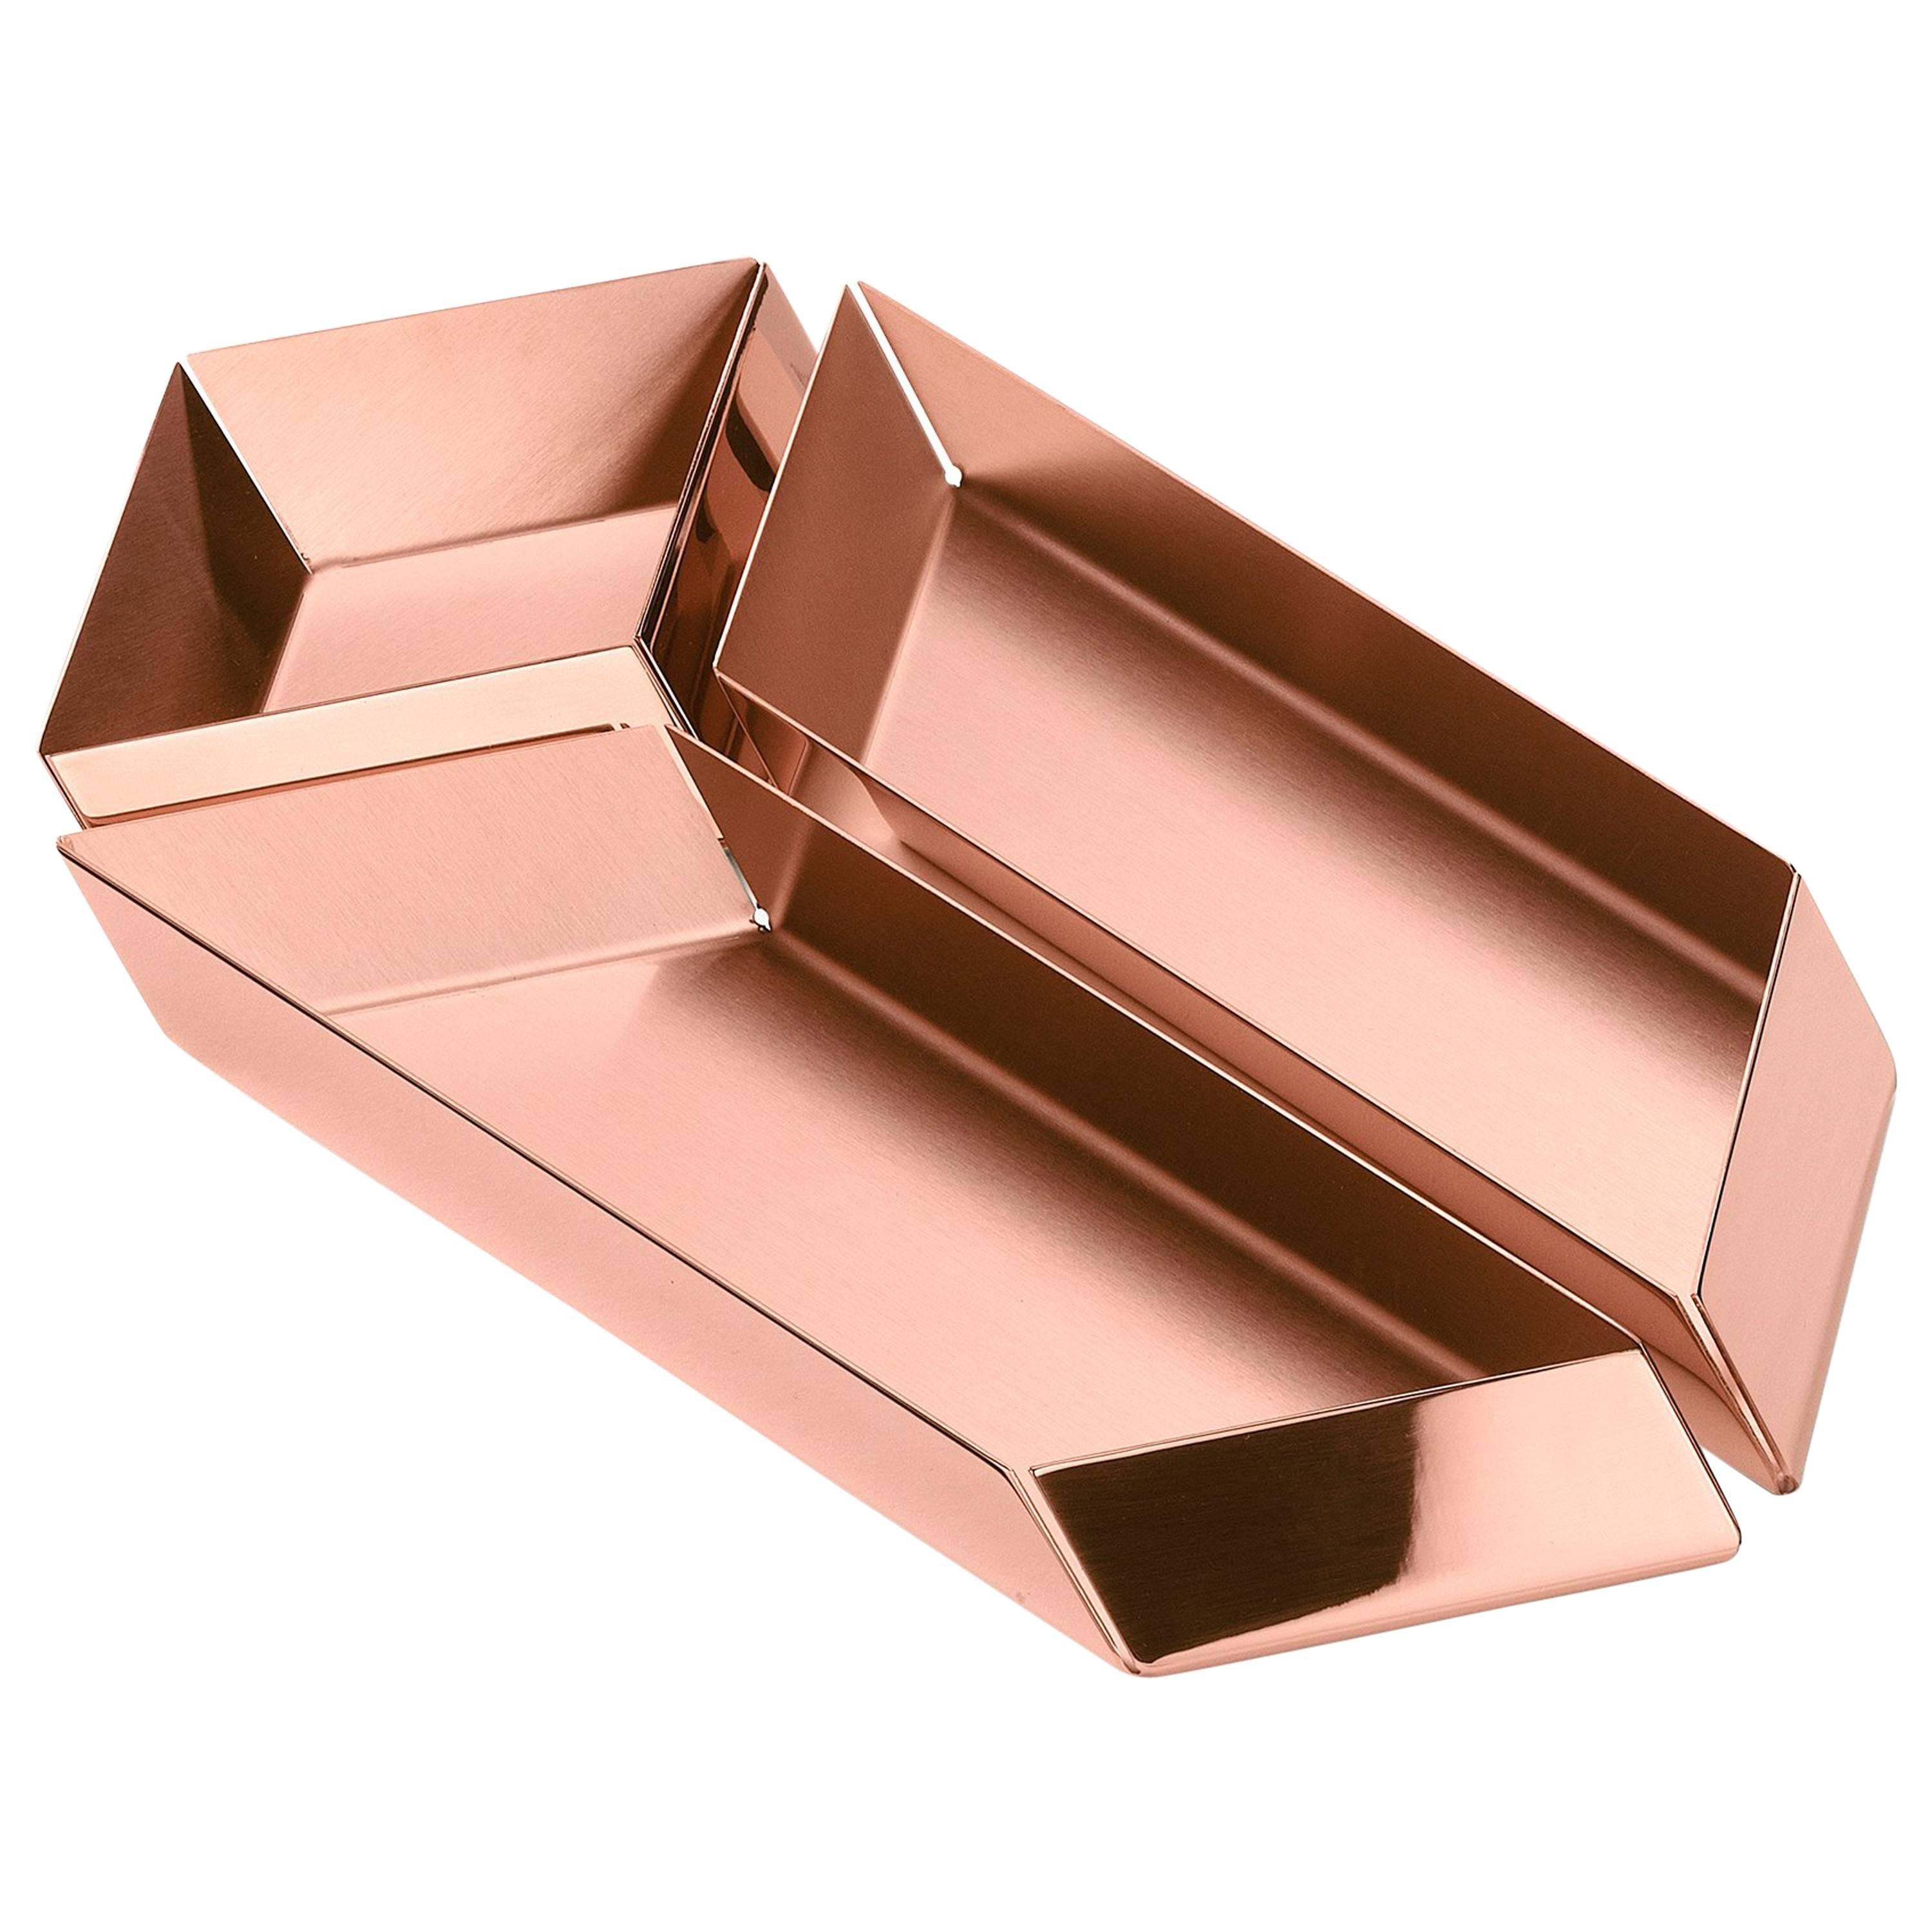 Ghidini 1961 Axonometry Set 3 Kleines Parallelepiped-Tablett in Roségold-Finish